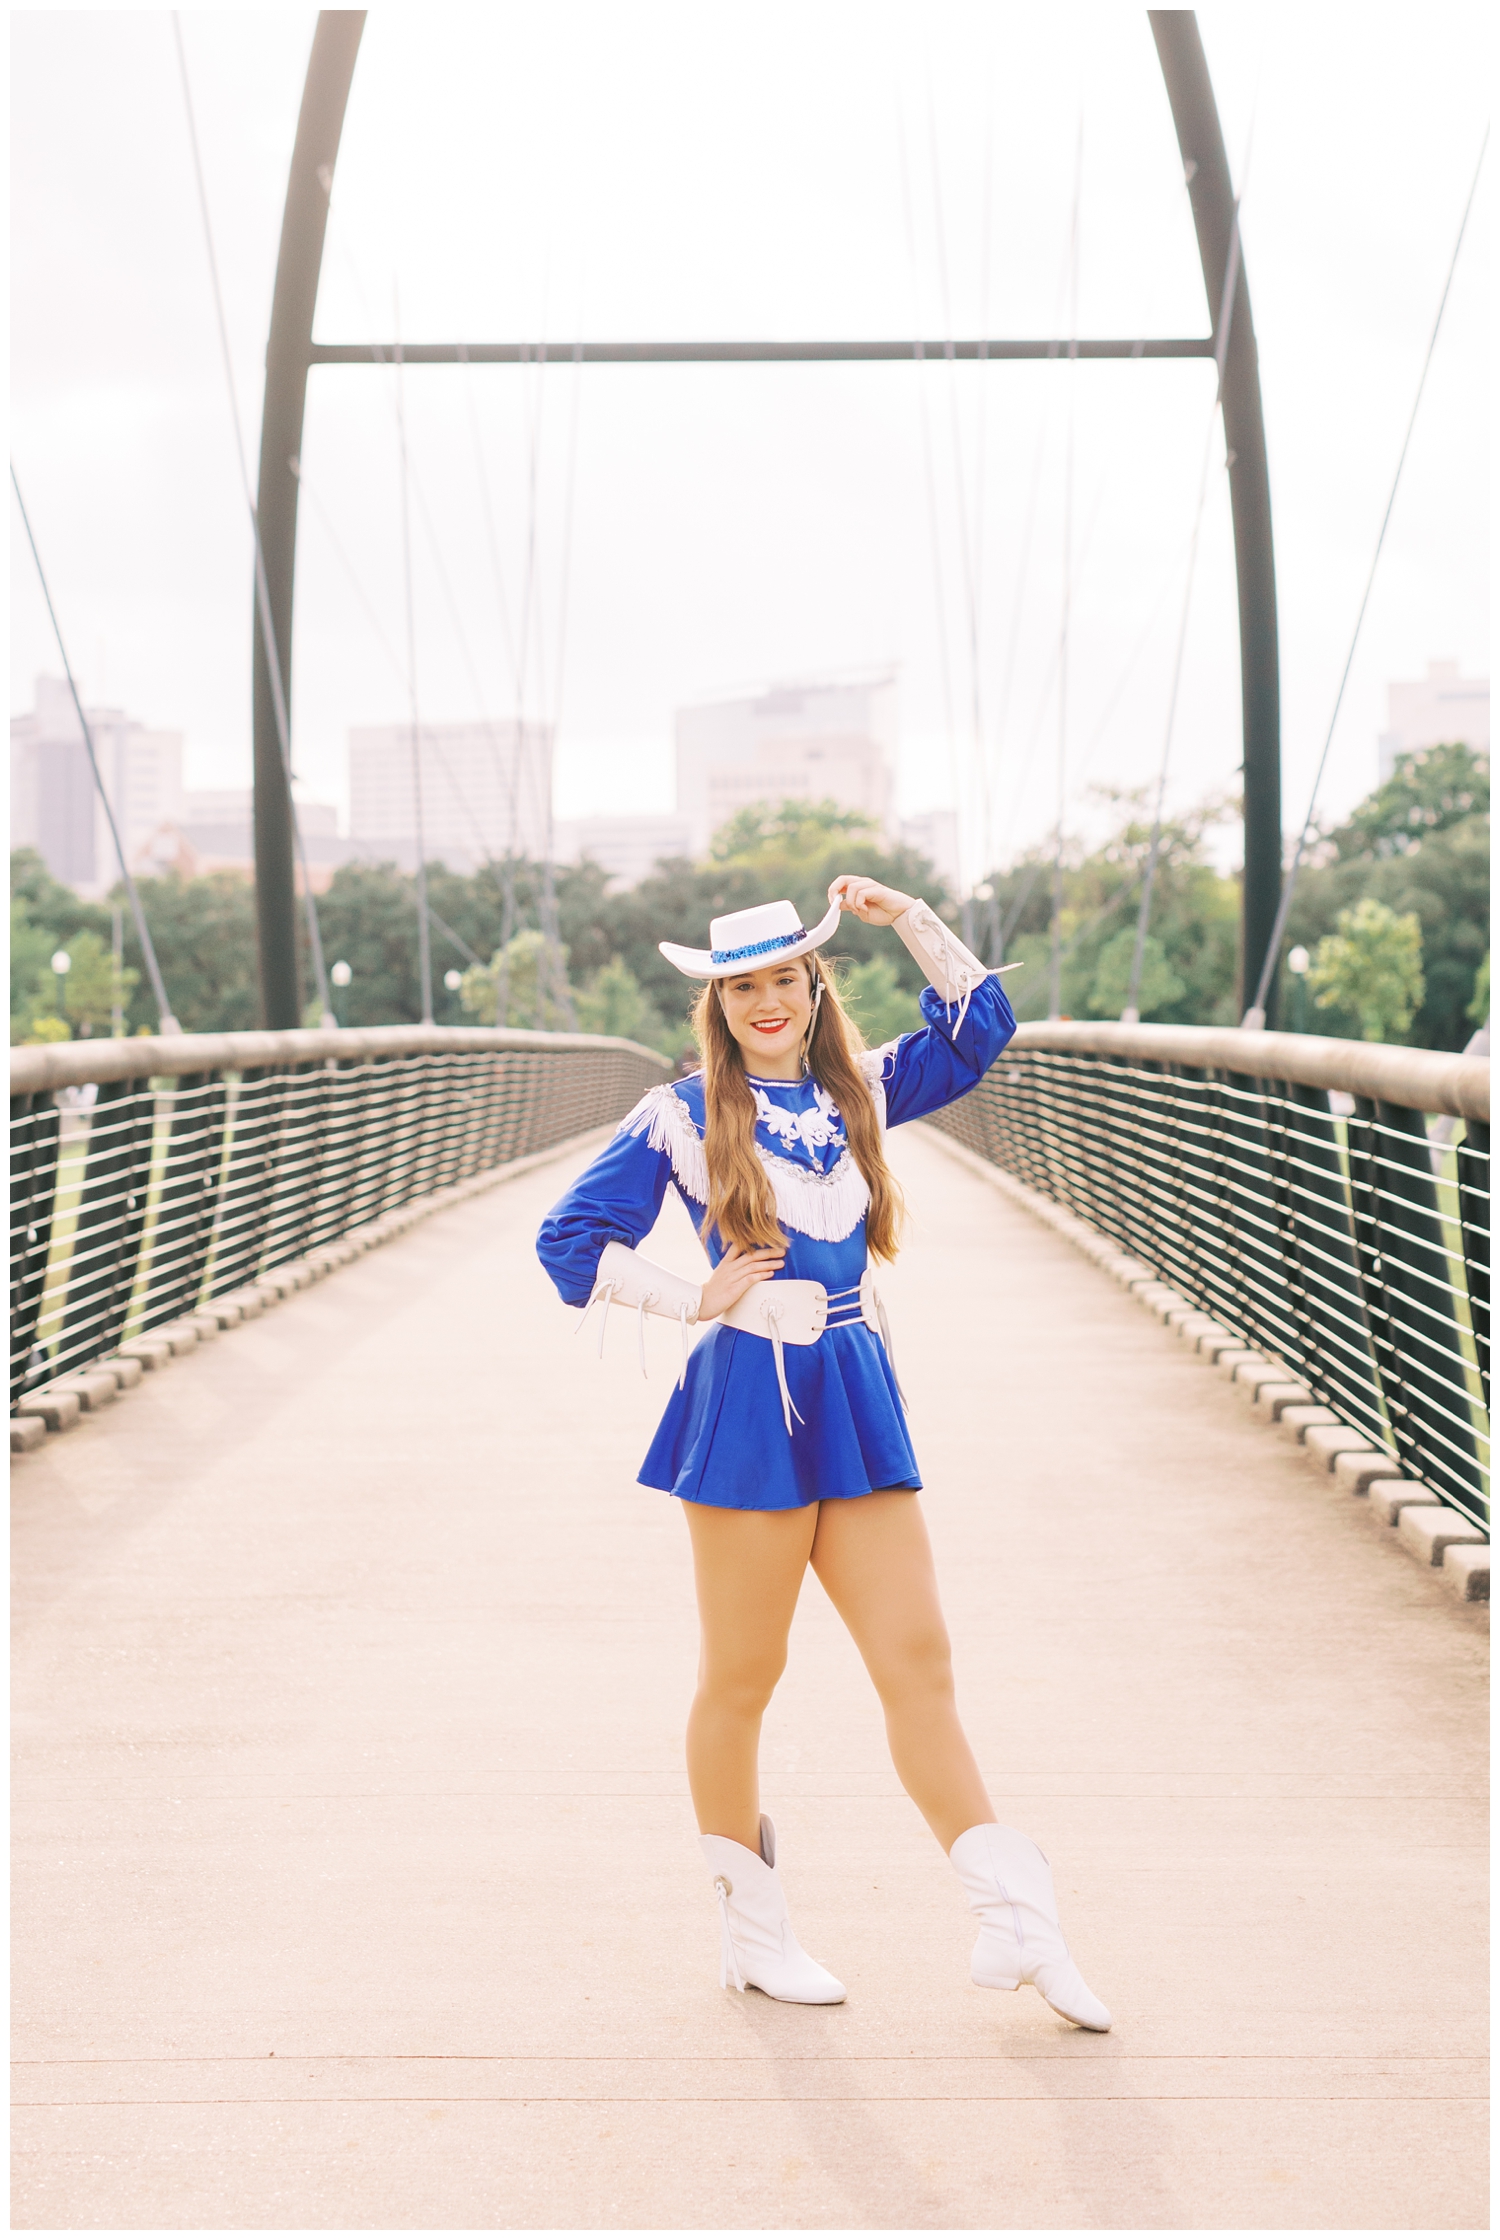 drill team dancer posing on a bridge with hand on hat at Hermann ParkHouston